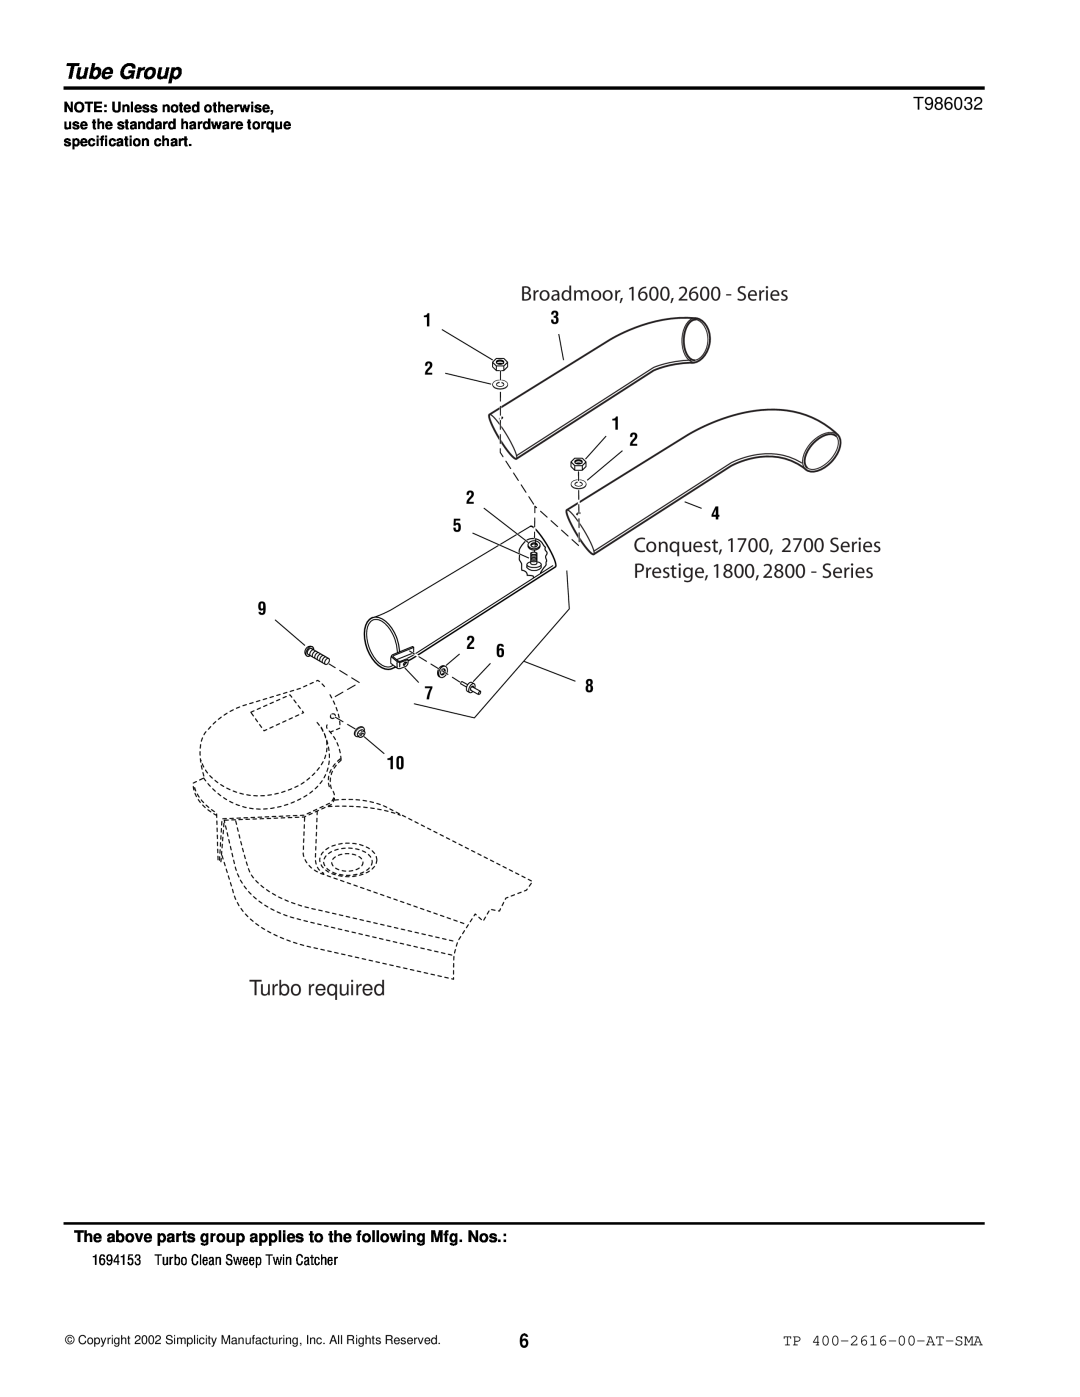 Simplicity 1694153 manual Tube Group, Turbo required, T986032, Broadmoor, 1600, 2600 - Series 